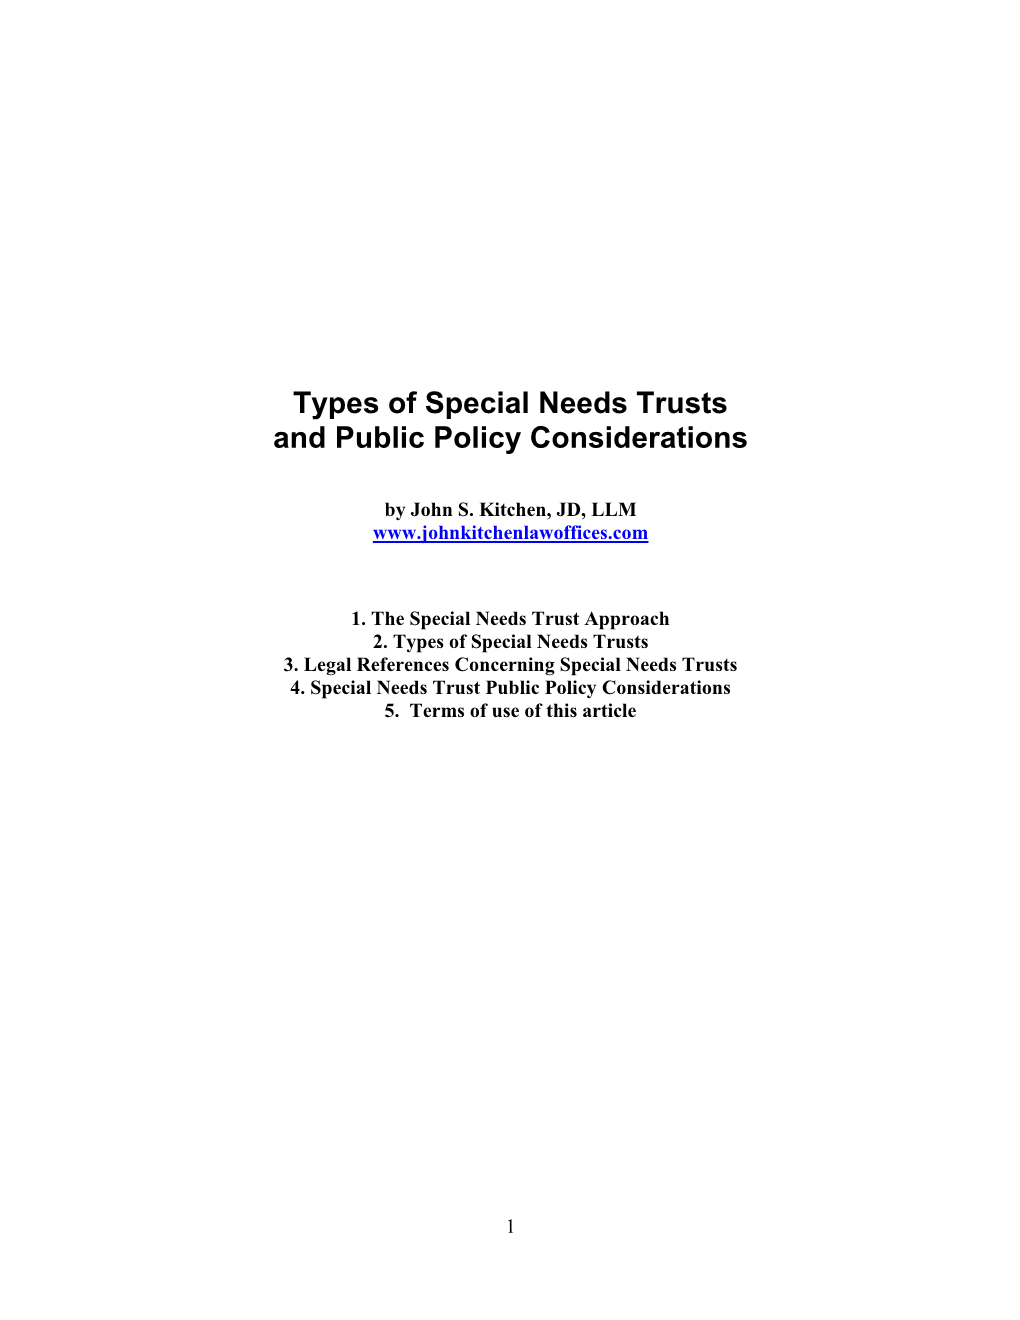 Types of Special Needs Trusts and Public Policy Considerations